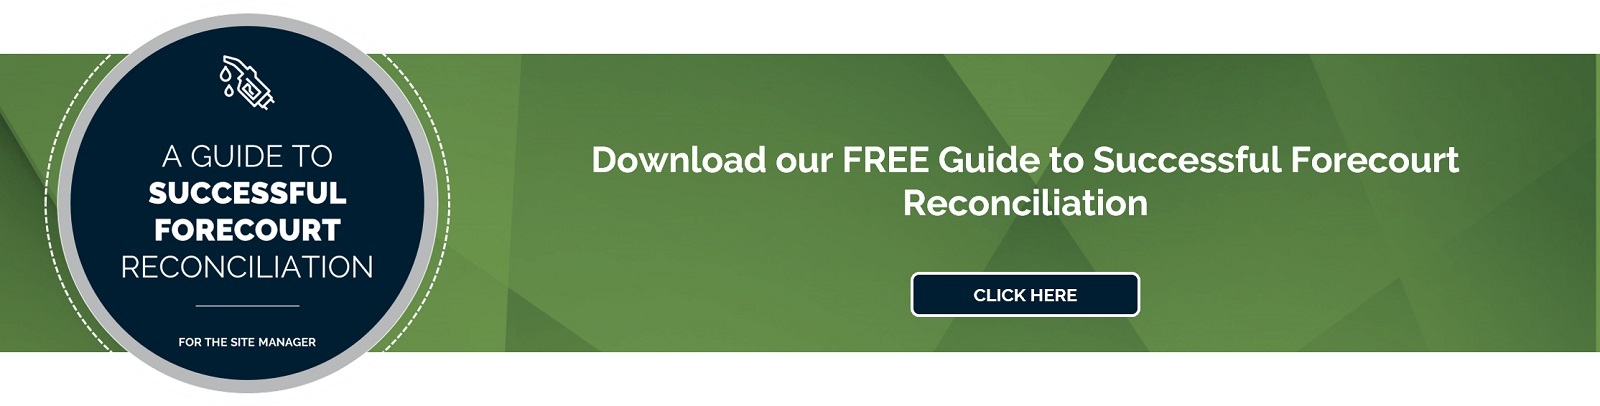 A guide to successful forecourt reconciliation ebook - Gilbarco